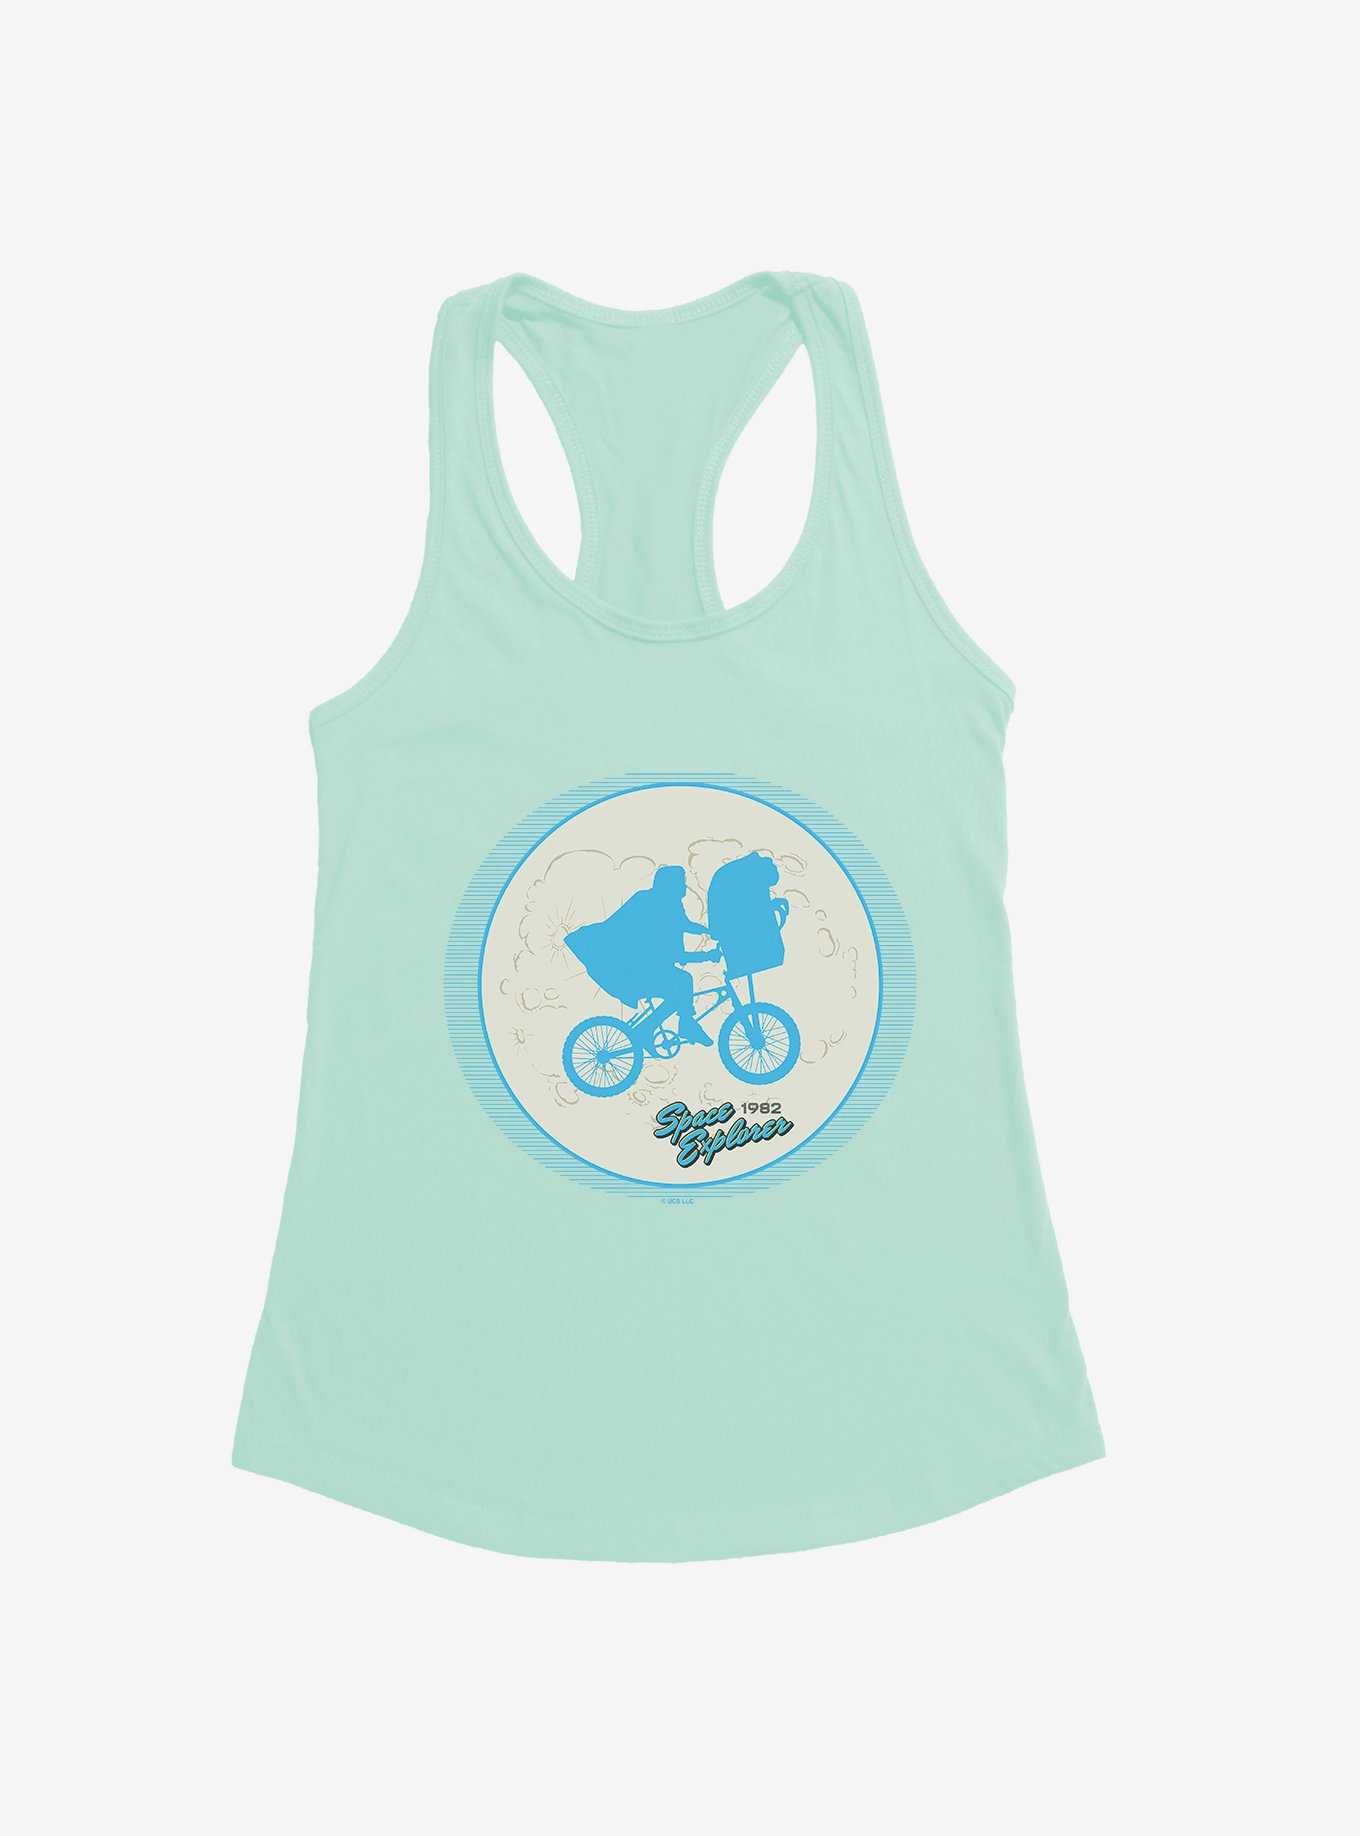 E.T. Over The Moon Girls Tank, , hi-res